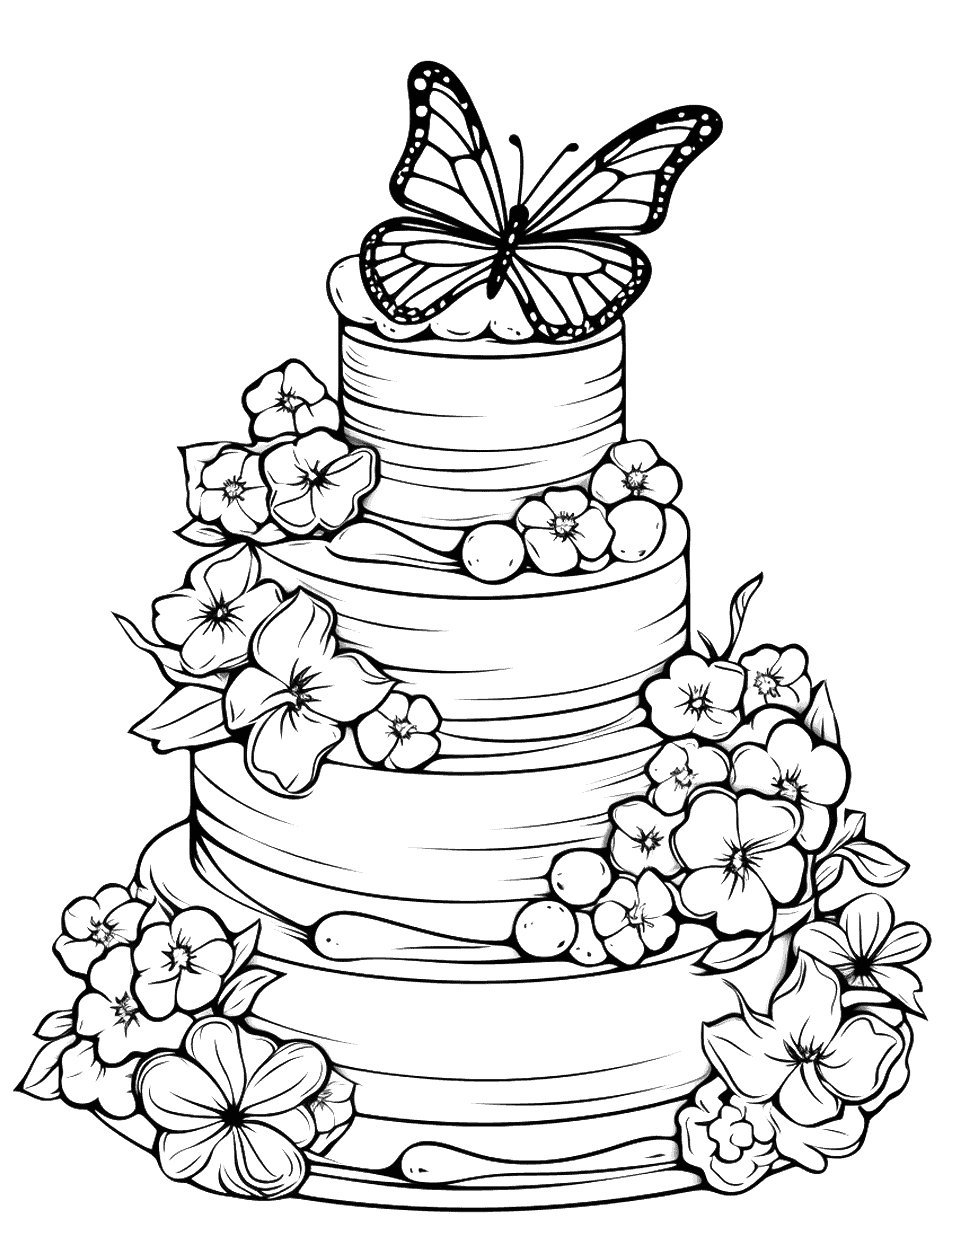 Butterfly Garden Cake Coloring Page - A cake with edible butterflies and floral decorations.